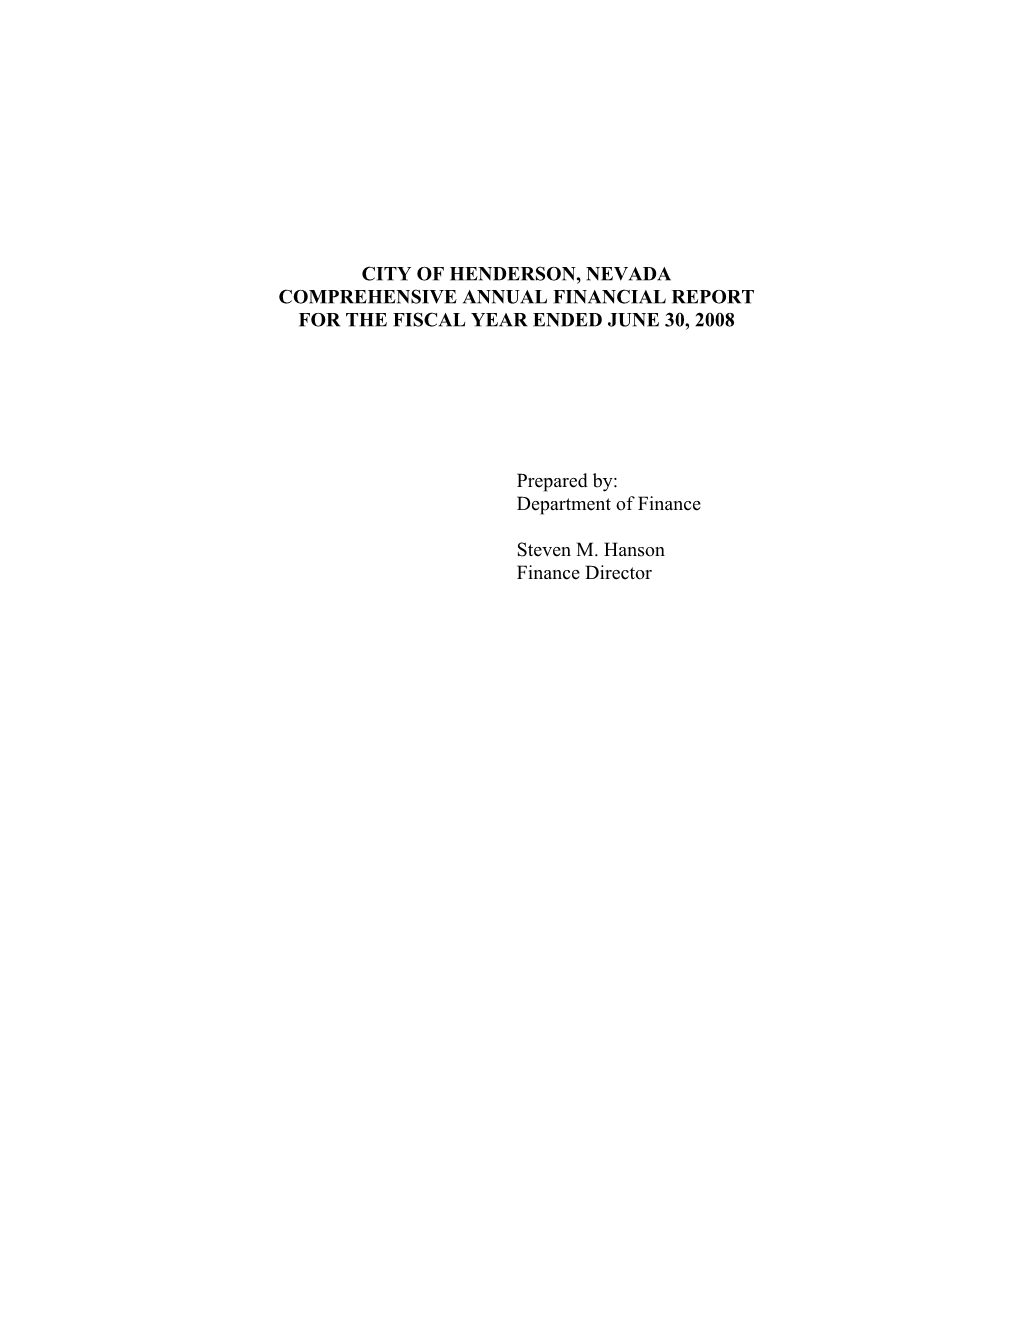 City of Henderson, Nevada Comprehensive Annual Financial Report for the Fiscal Year Ended June 30, 2008